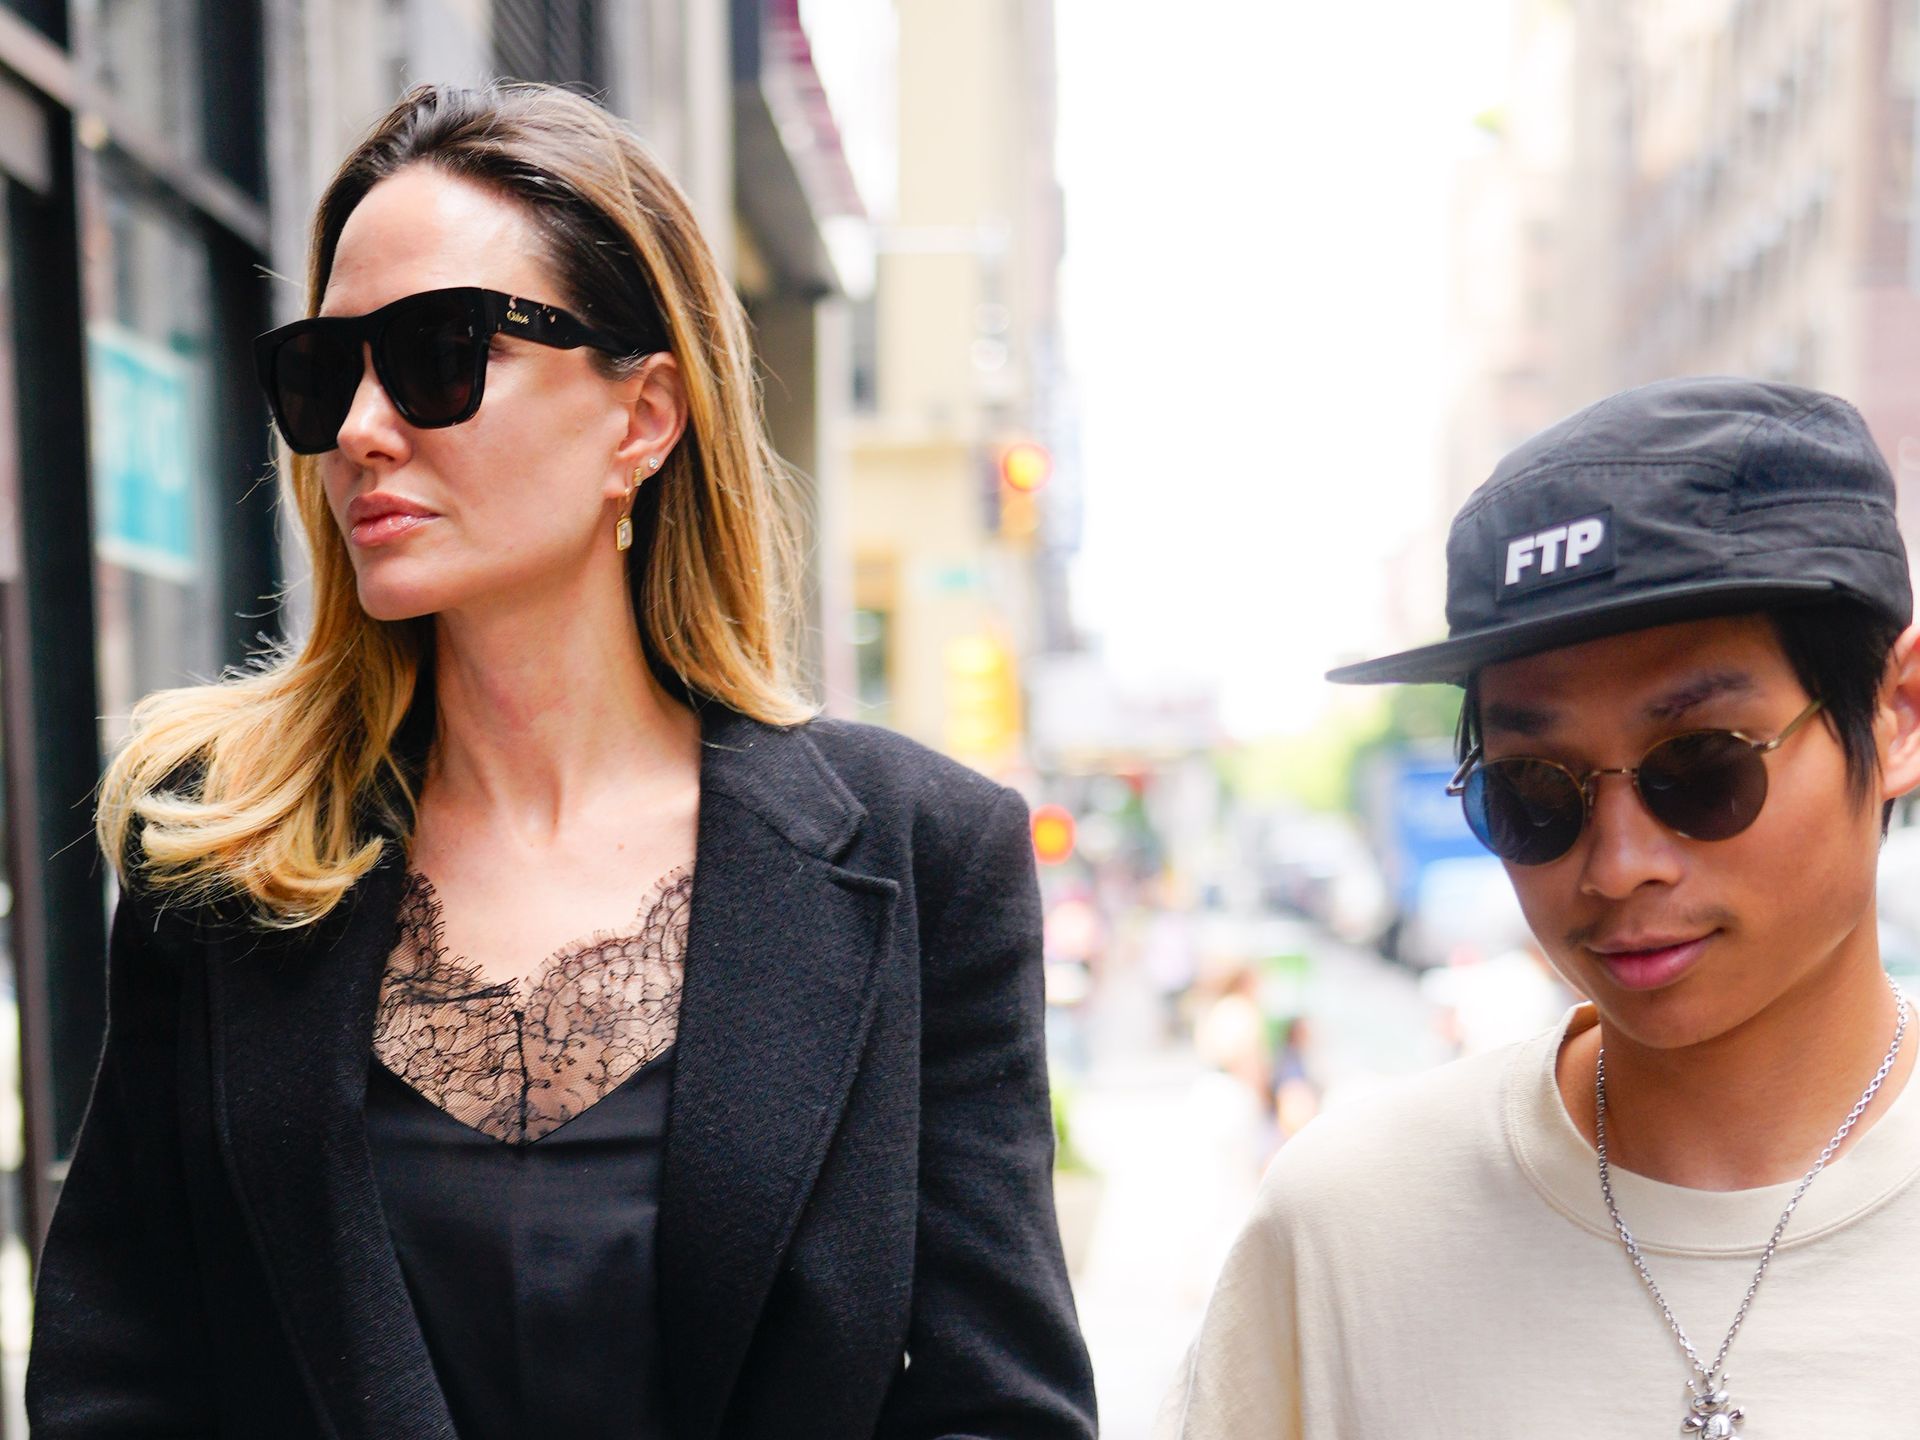 Angelina Jolie Is Chic in a Black Lacy Top While Out With Son Pax